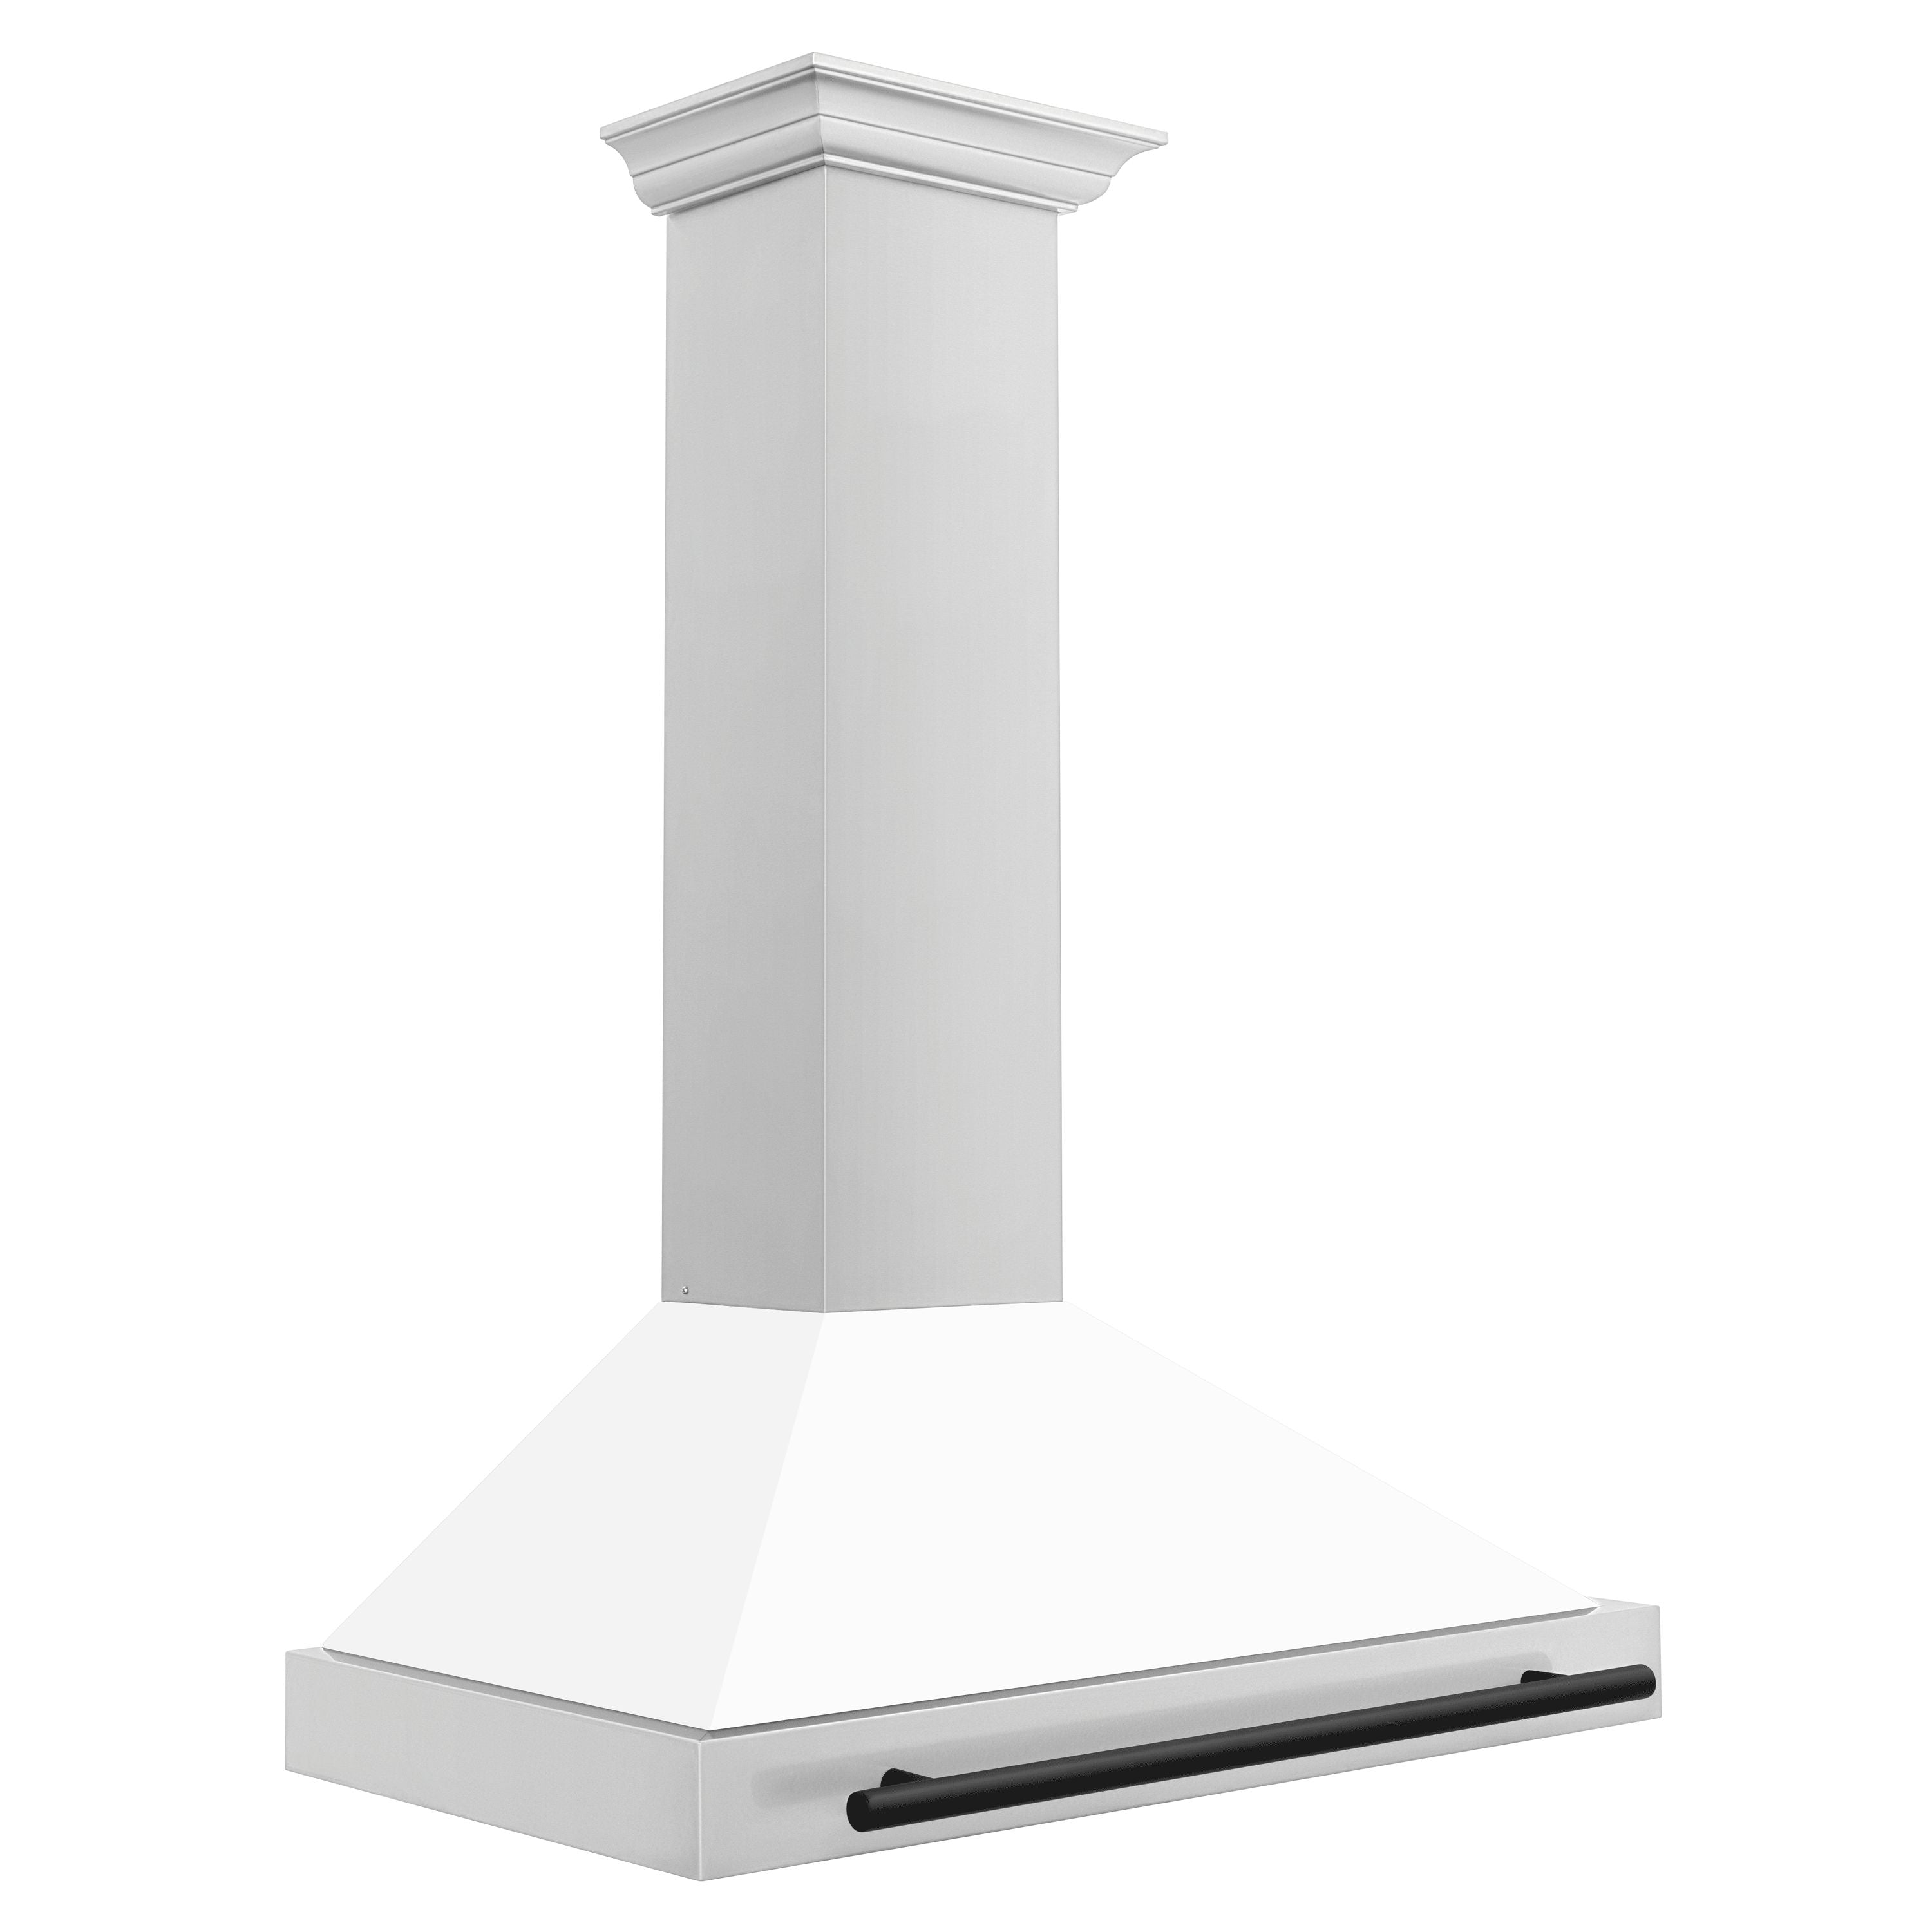 ZLINE 36 in. Autograph Edition Stainless Steel Range Hood with White Matte Shell and Matte Black Accents (KB4STZ-WM36) features crown molding.